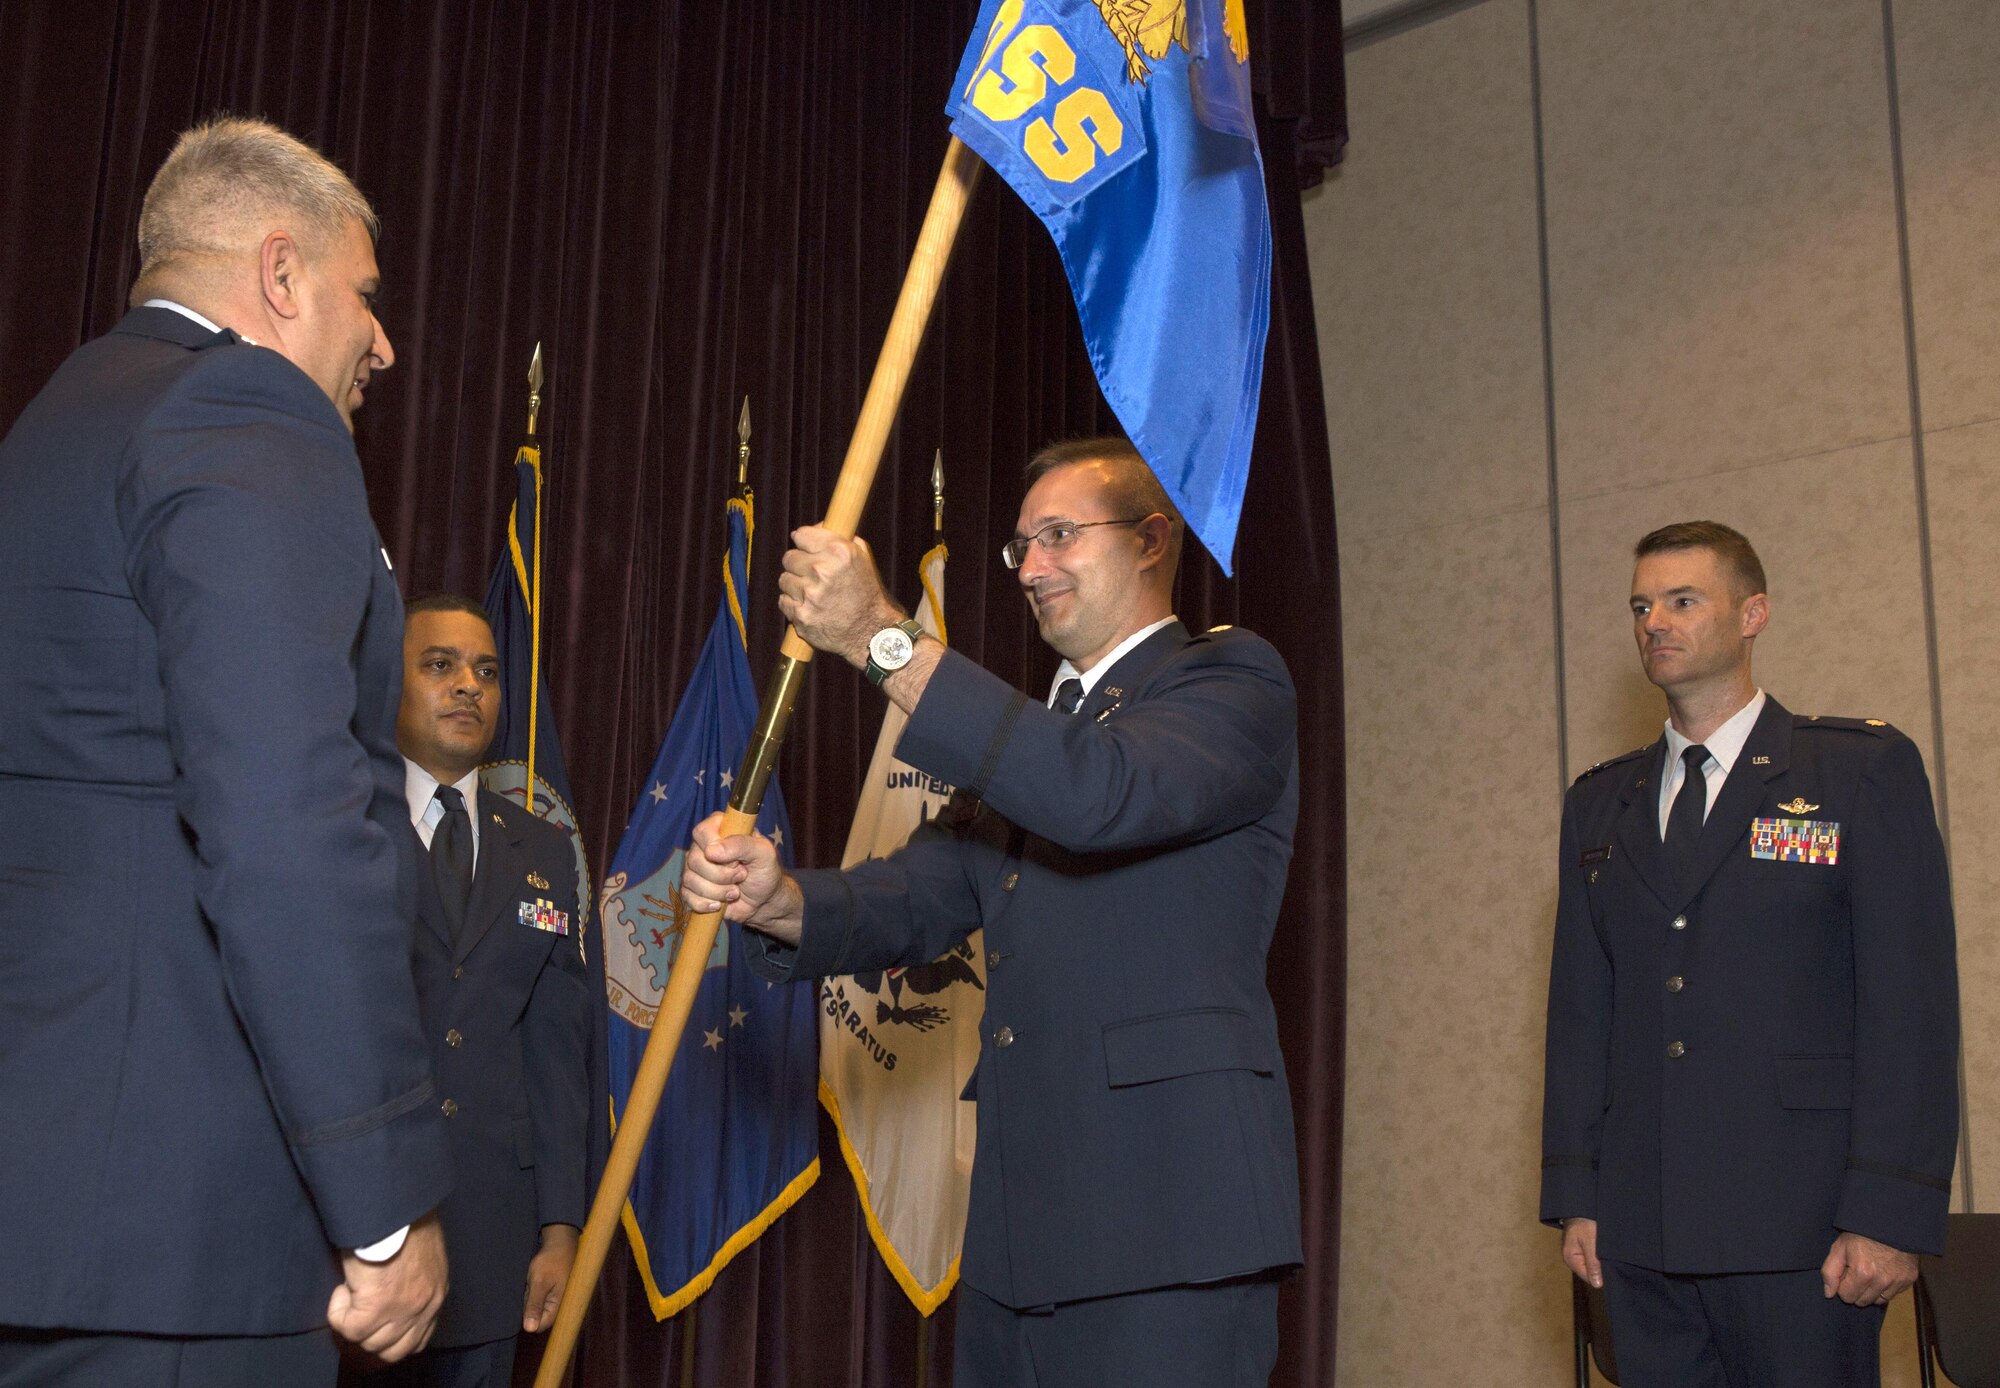 Lt. Col. Scott Nichols, middle, 920th Operations Support Squadron commander, takes the unit guidon from Col. Michael LoForti, 920th Operations Group commander, during the squadron change of command ceremony July 9, 2017 at Patrick Air Force Base, Florida. (U.S. Air Force photo/Master Sgt. Mark Borosch)